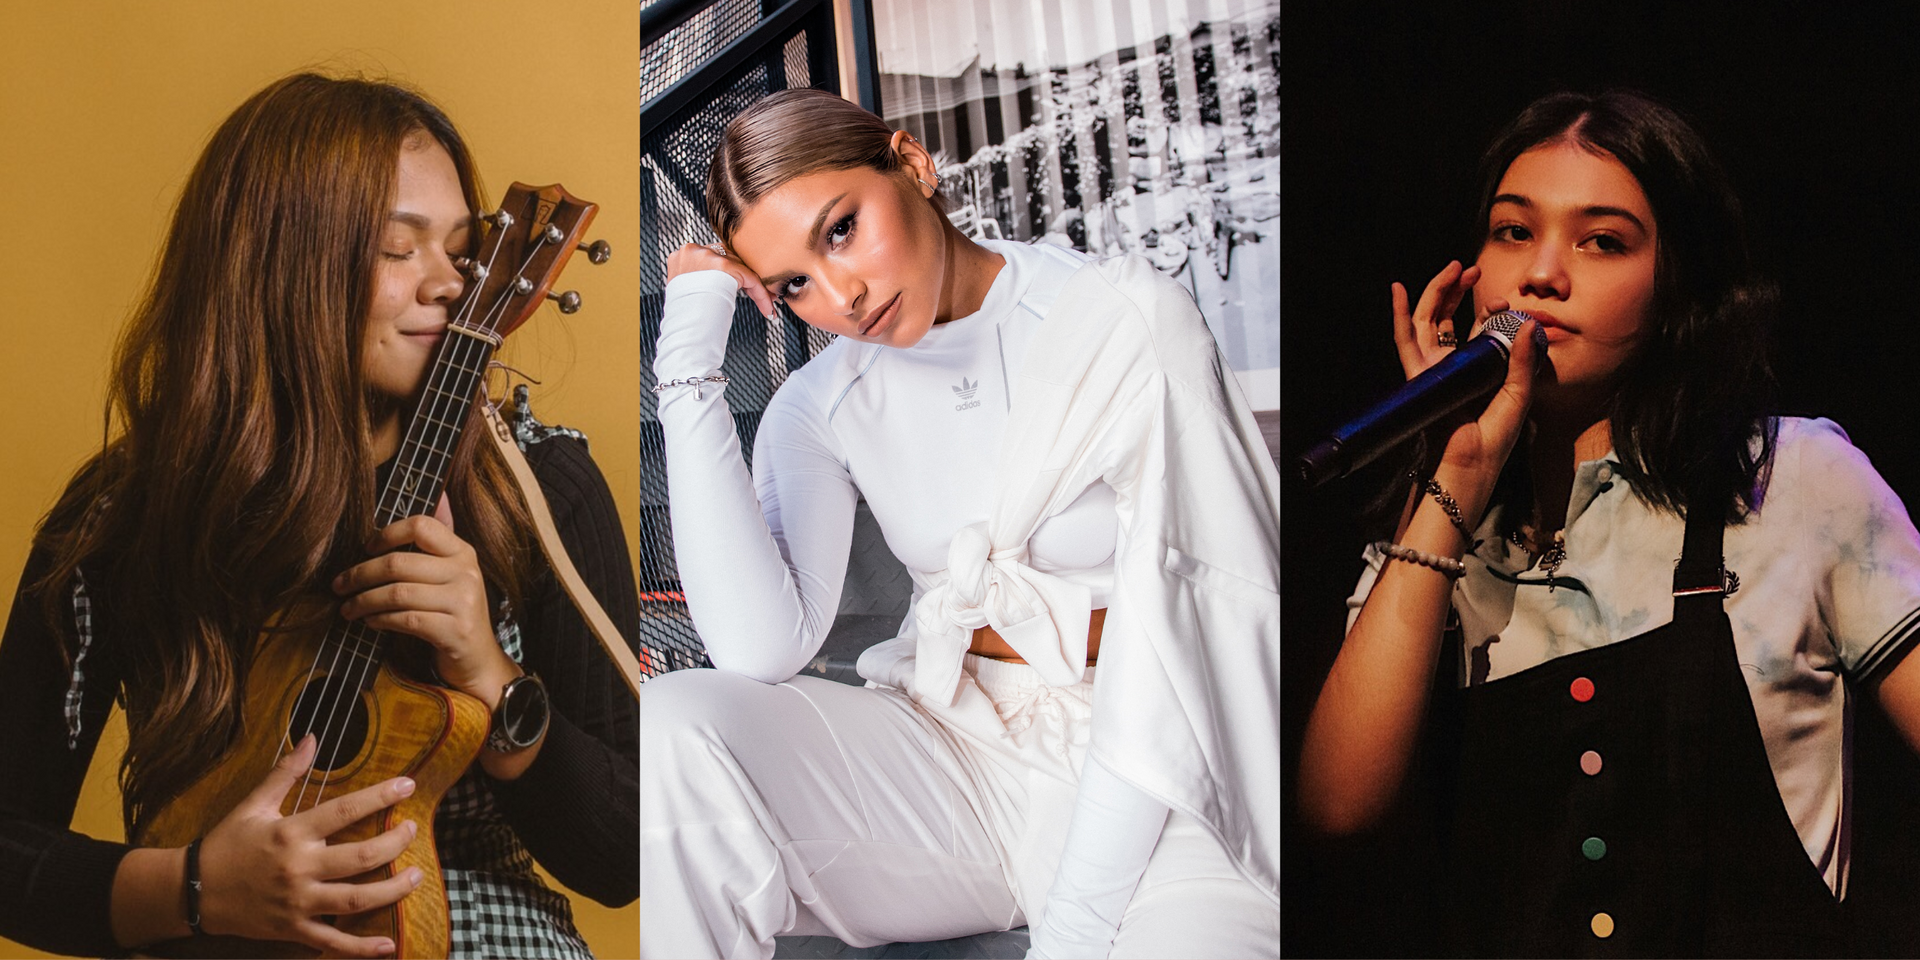 Reneé Dominique, Tabitha Nauser and Shye to perform at Marina Bay Sands' Open Stage this February